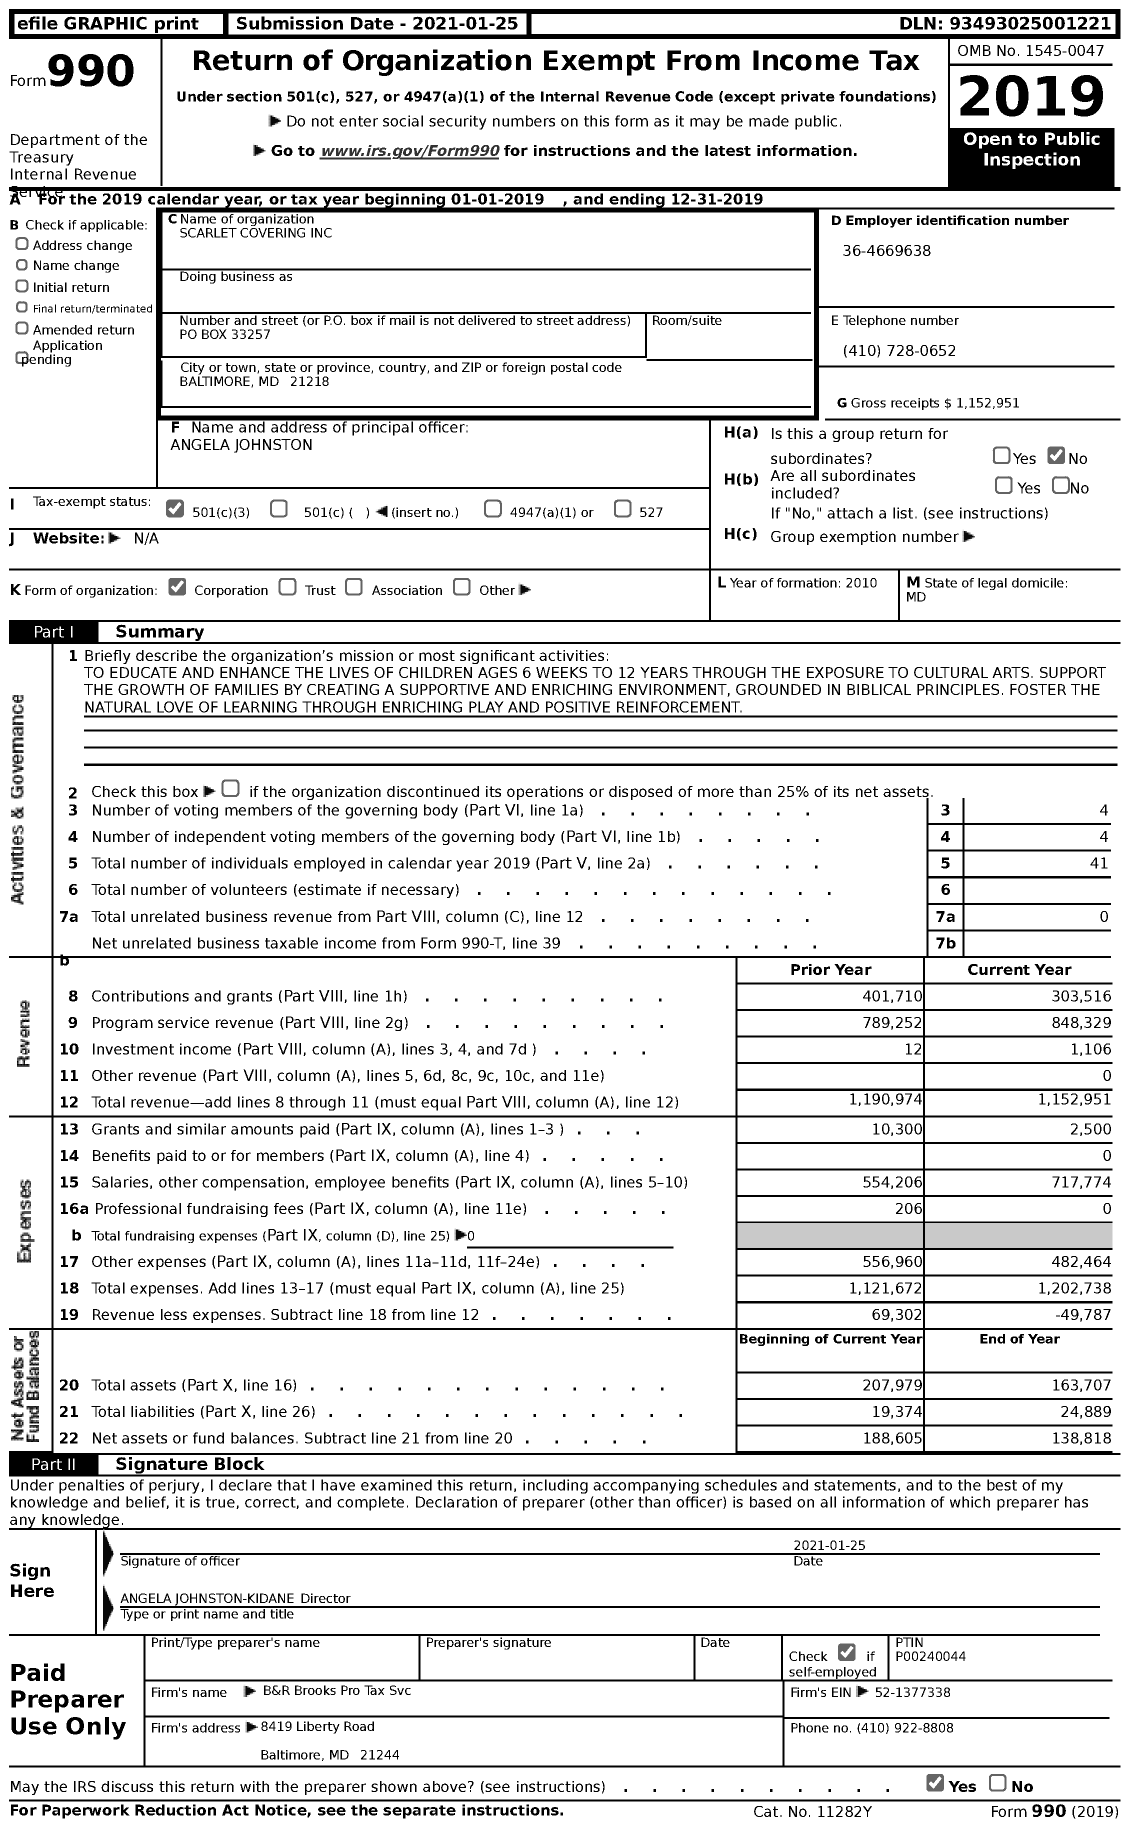 Image of first page of 2019 Form 990 for Scarlet Covering